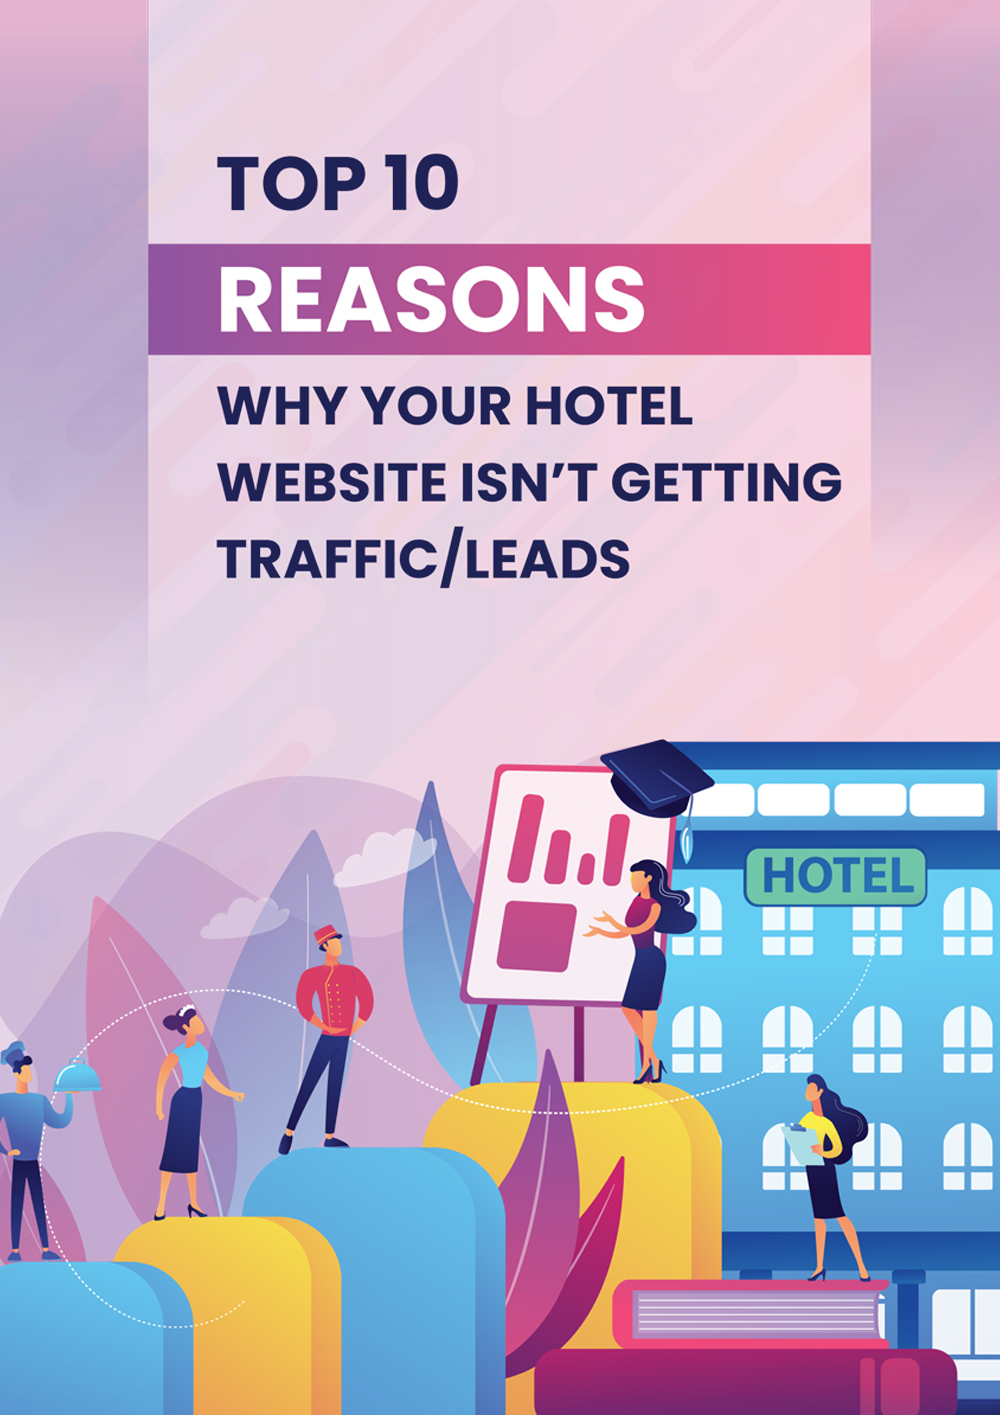 Top 10 Reasons Why Your Hotel Website Isnt Getting Traffic/Leads